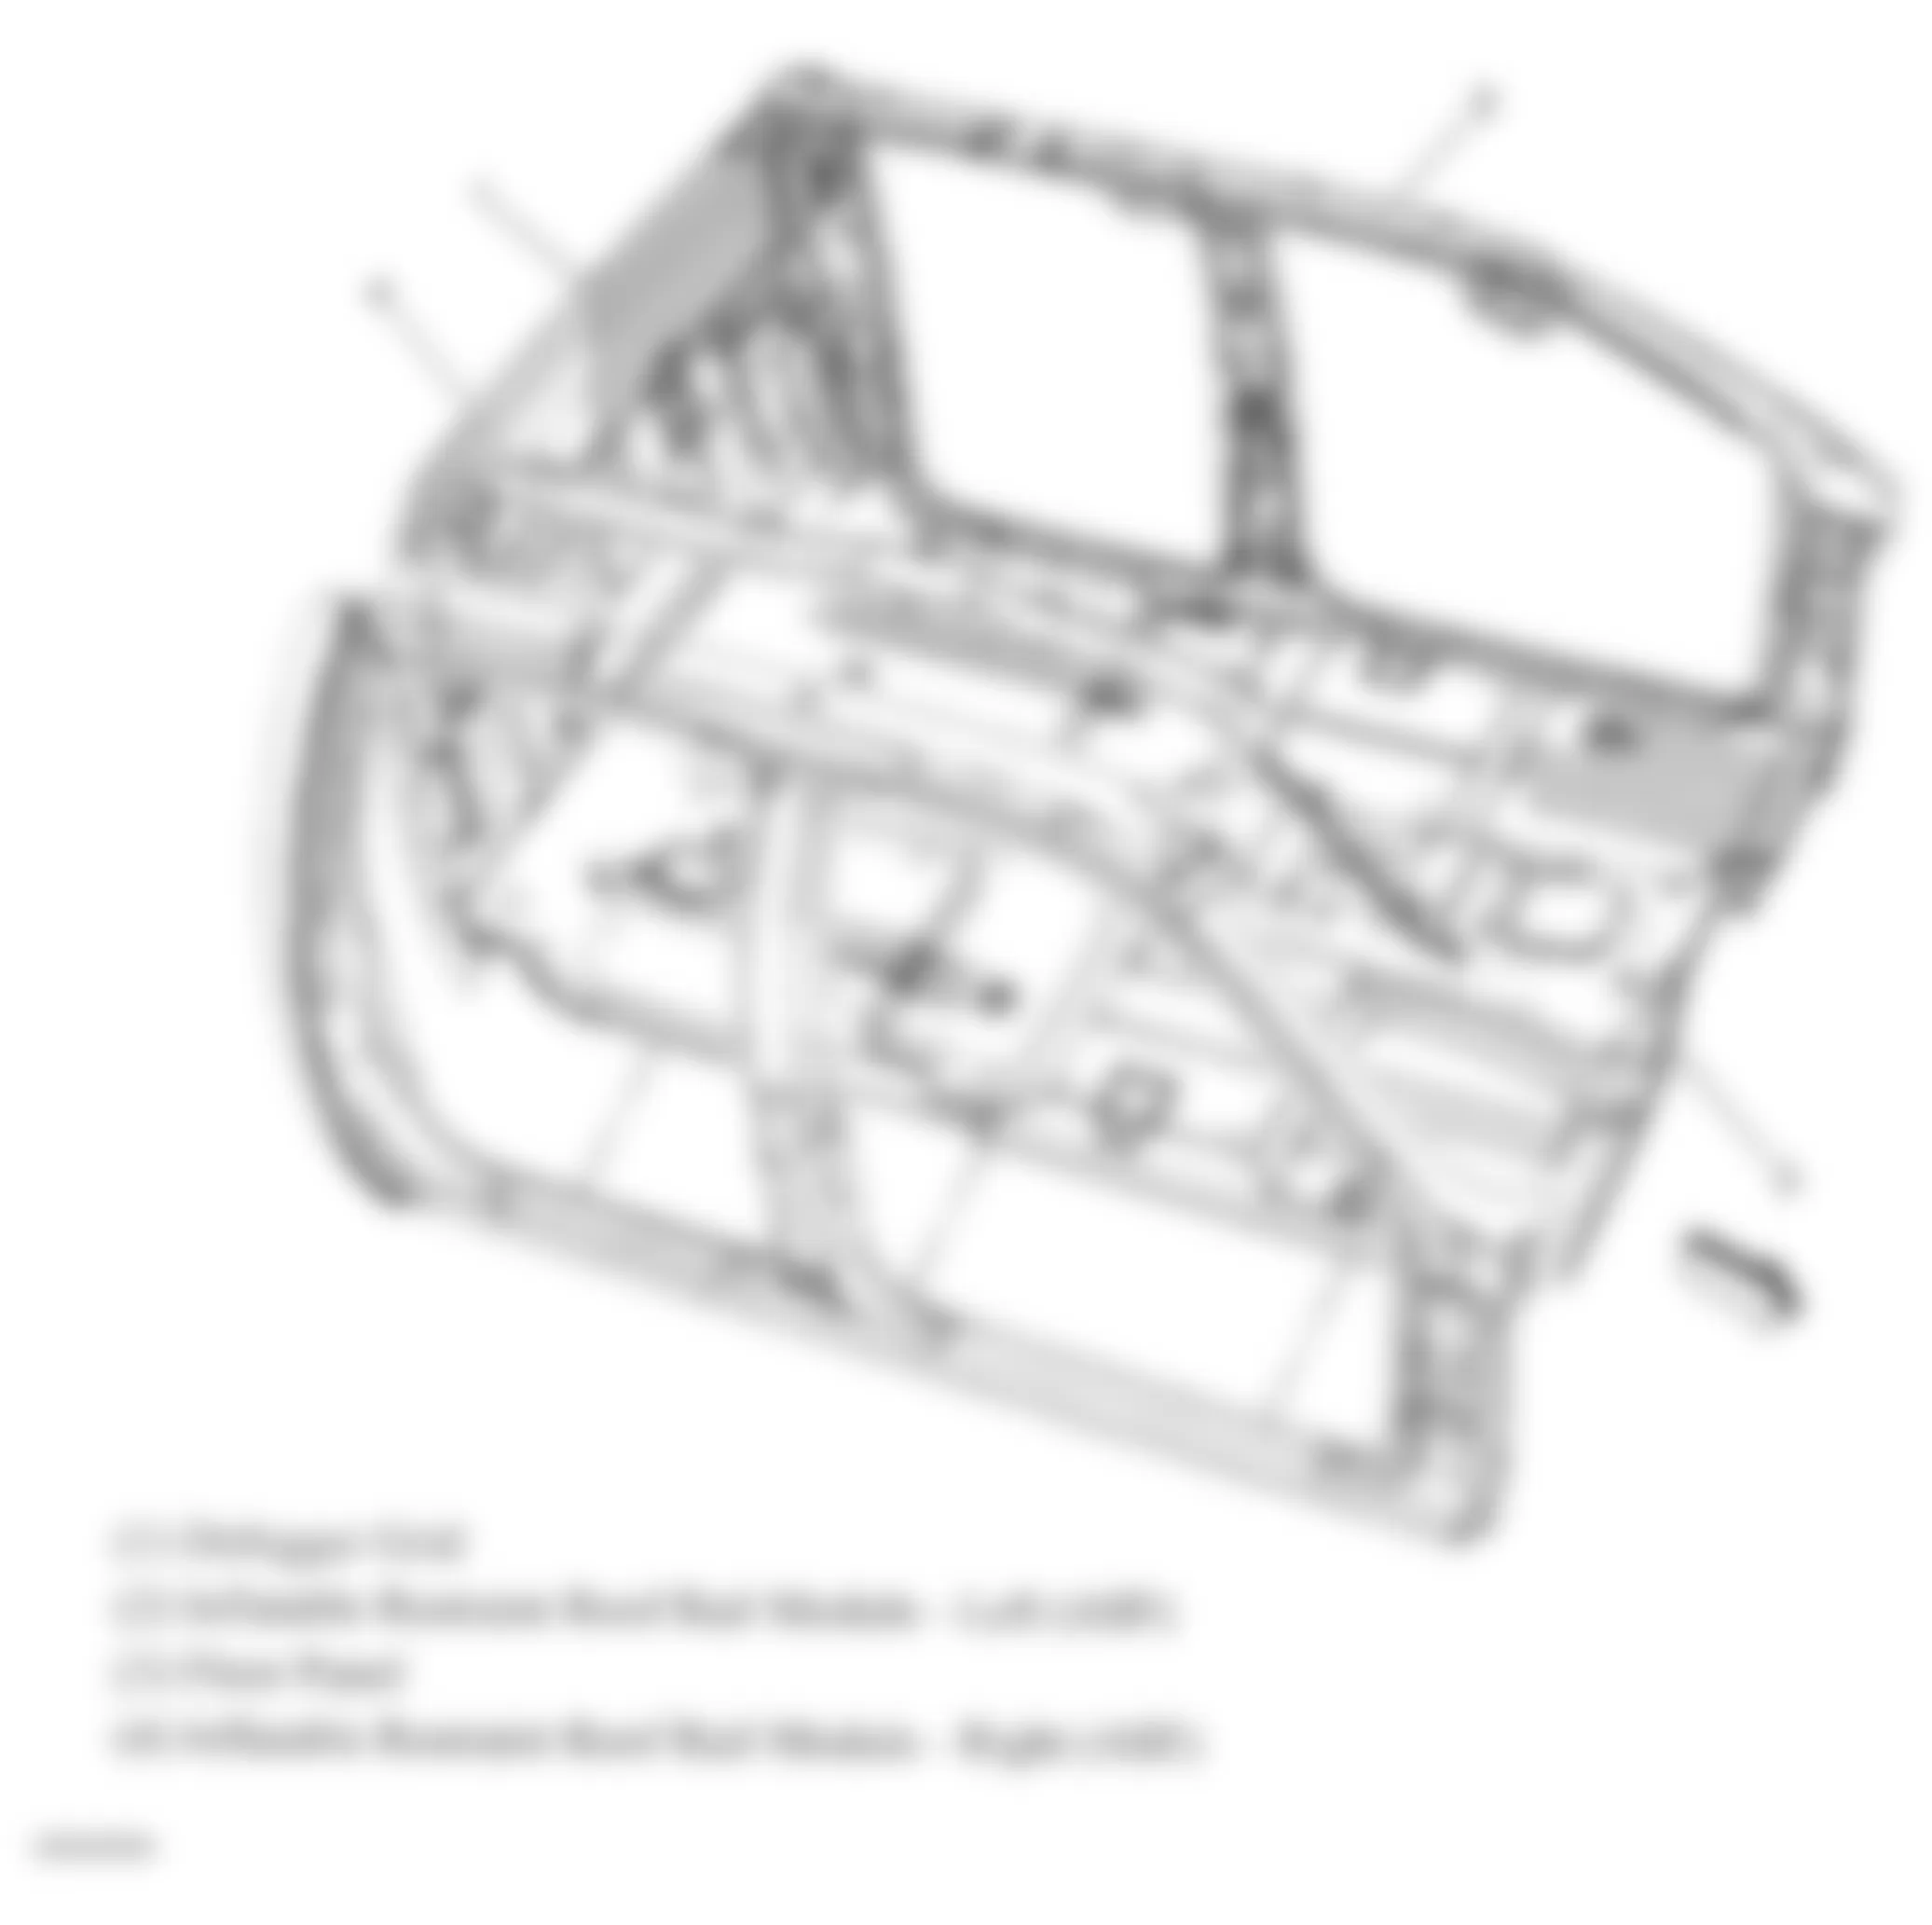 Chevrolet Silverado 2500 HD 2009 - Component Locations -  Roof Rail Air Bags (Extended Cab & Crew Cab)